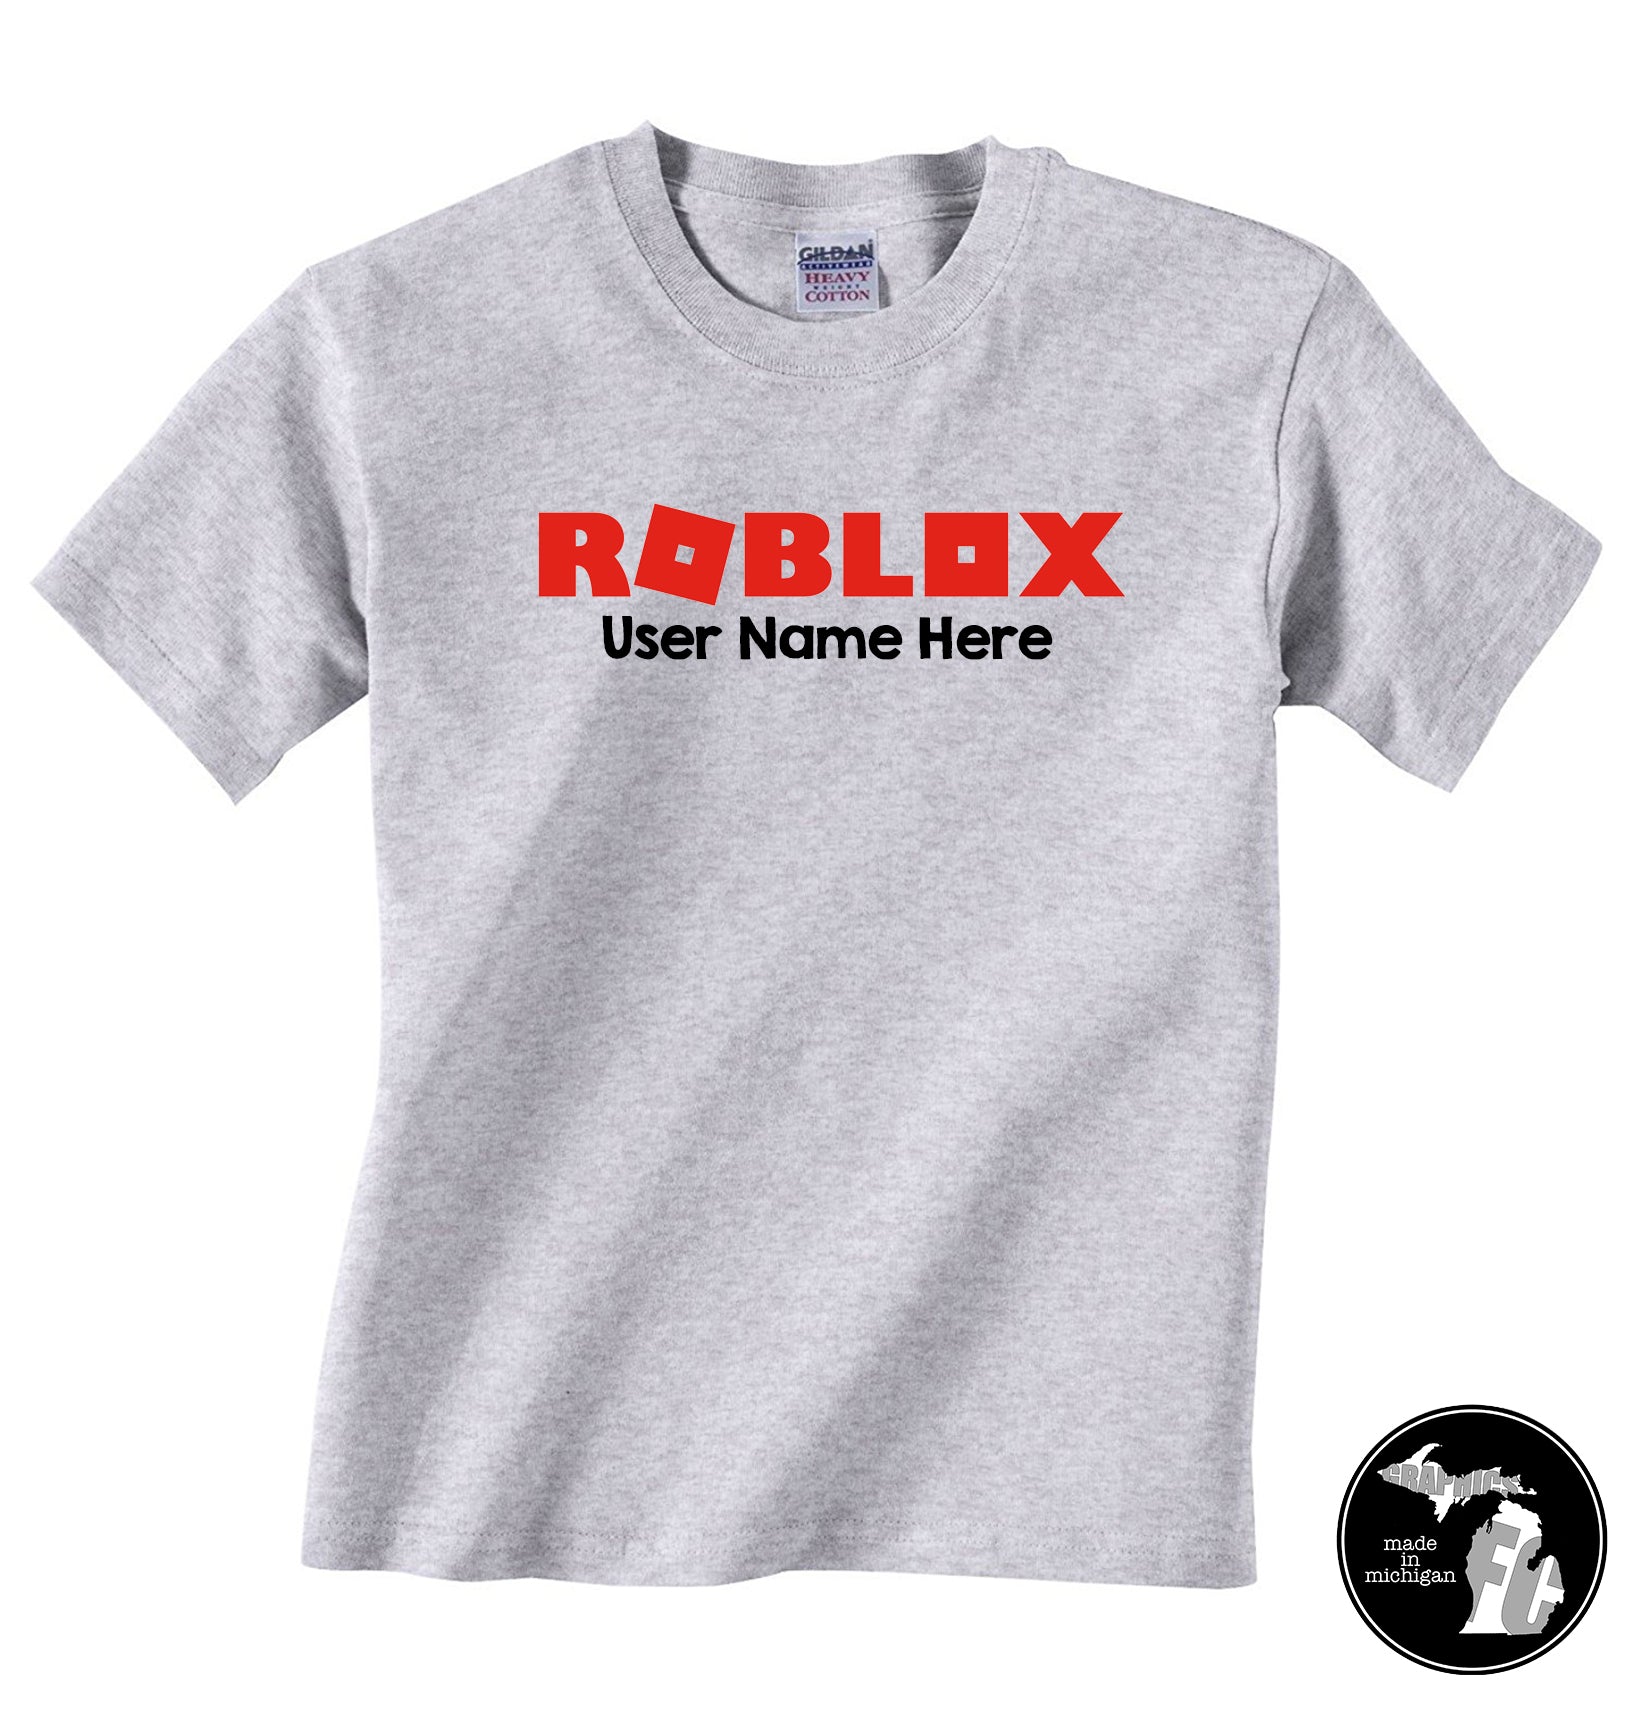 Roblox T Shirt With Personal User Name Kids Shirt Child Adults Furniture City Graphics - roblox shirt viewer